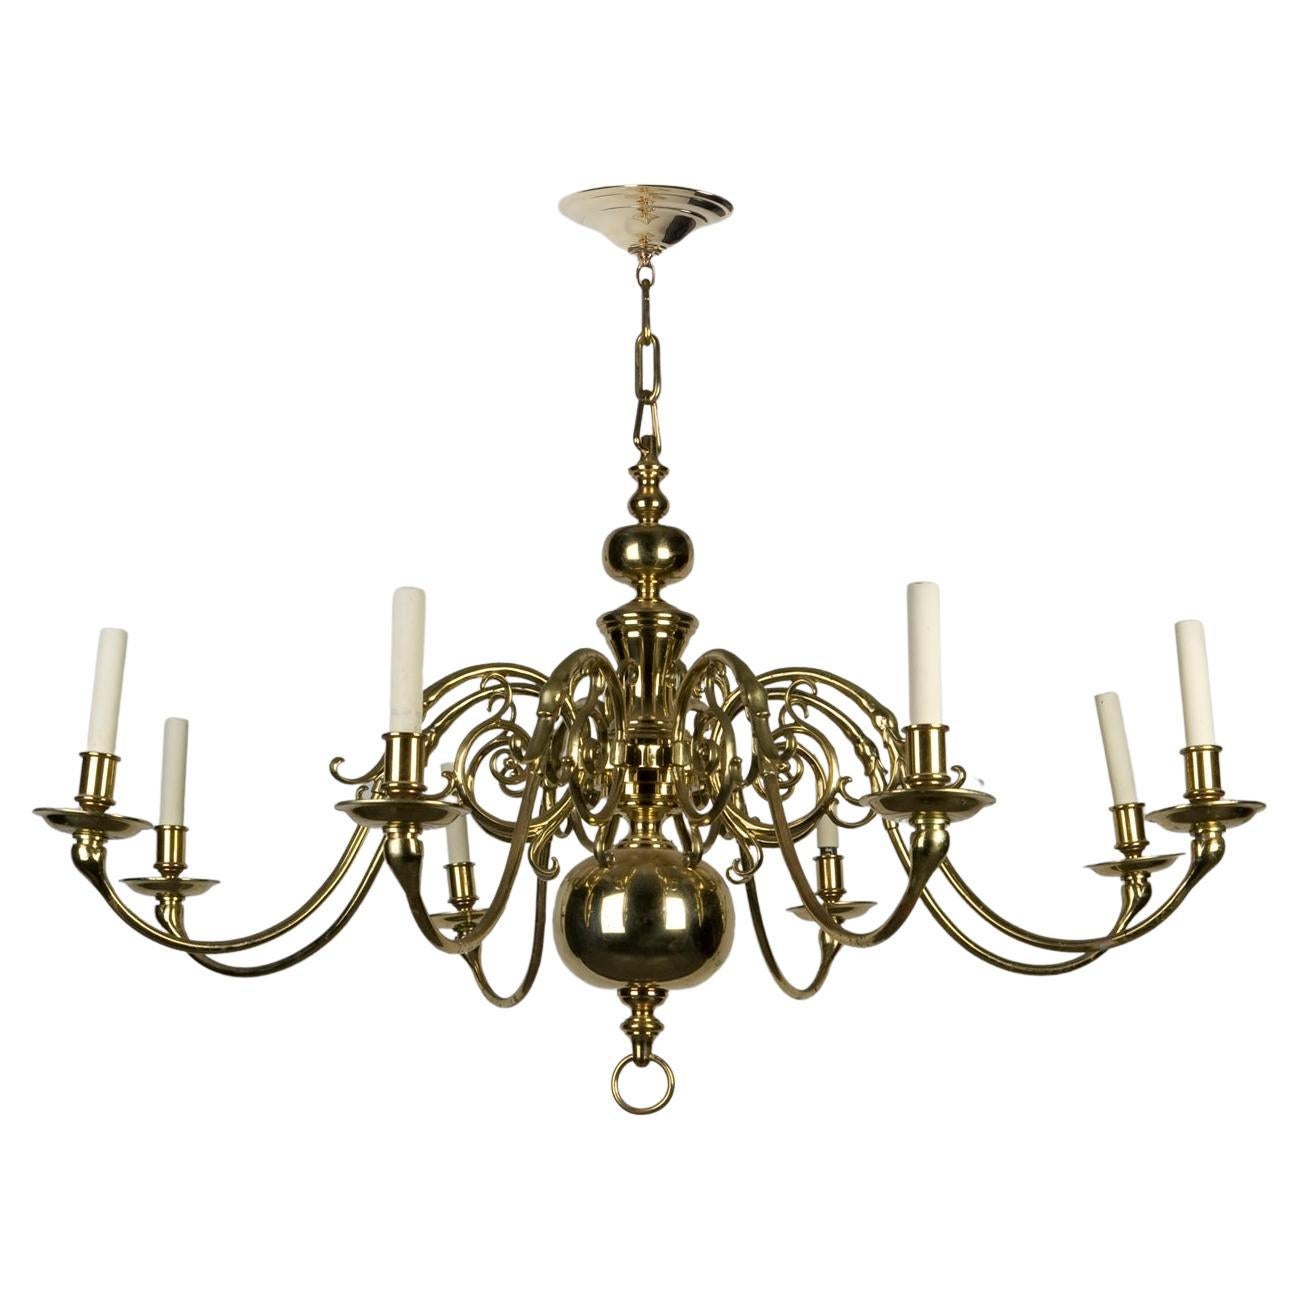 Solid Brass Eight Arm Dutch Colonial Style Chandelier, Circa 1950s